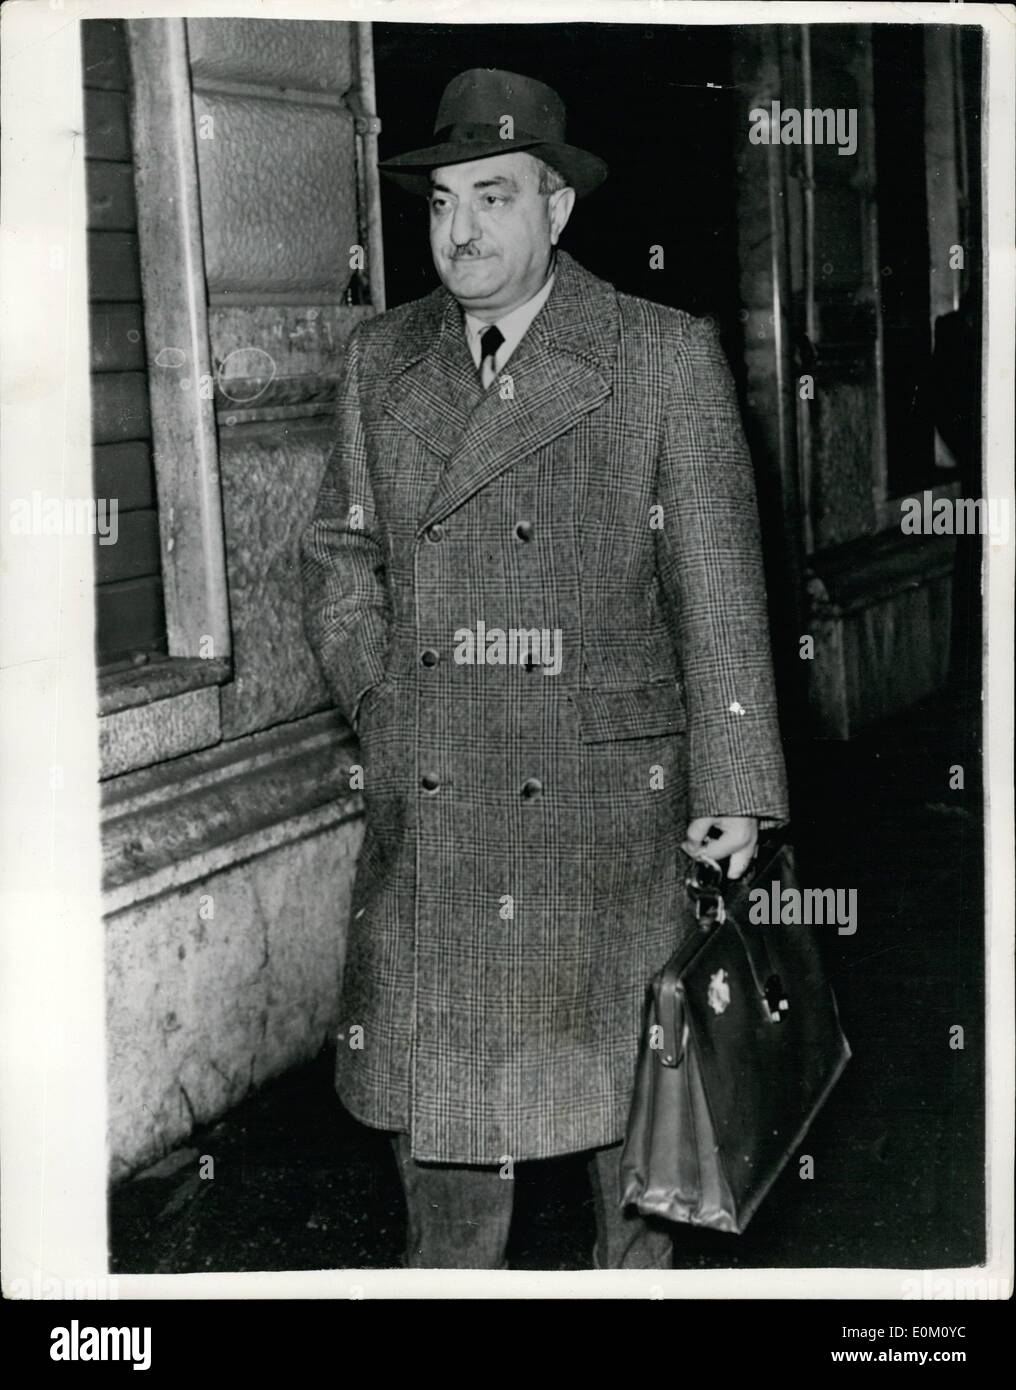 Jan. 01, 1953 - More Tankers For Persia -- Italian Company Chief's Assurance: Signor Mortillaro, managing director of the Supor, which is bringing 5,000 tons of fuel oils from Persia in the Miriella, 3, 457 tons, has said that his company will send more tankers soon to Persia, Signor Mortillaro, who returned recently from Teheran, said the Miriella was coming by the Suez Canal Stock Photo